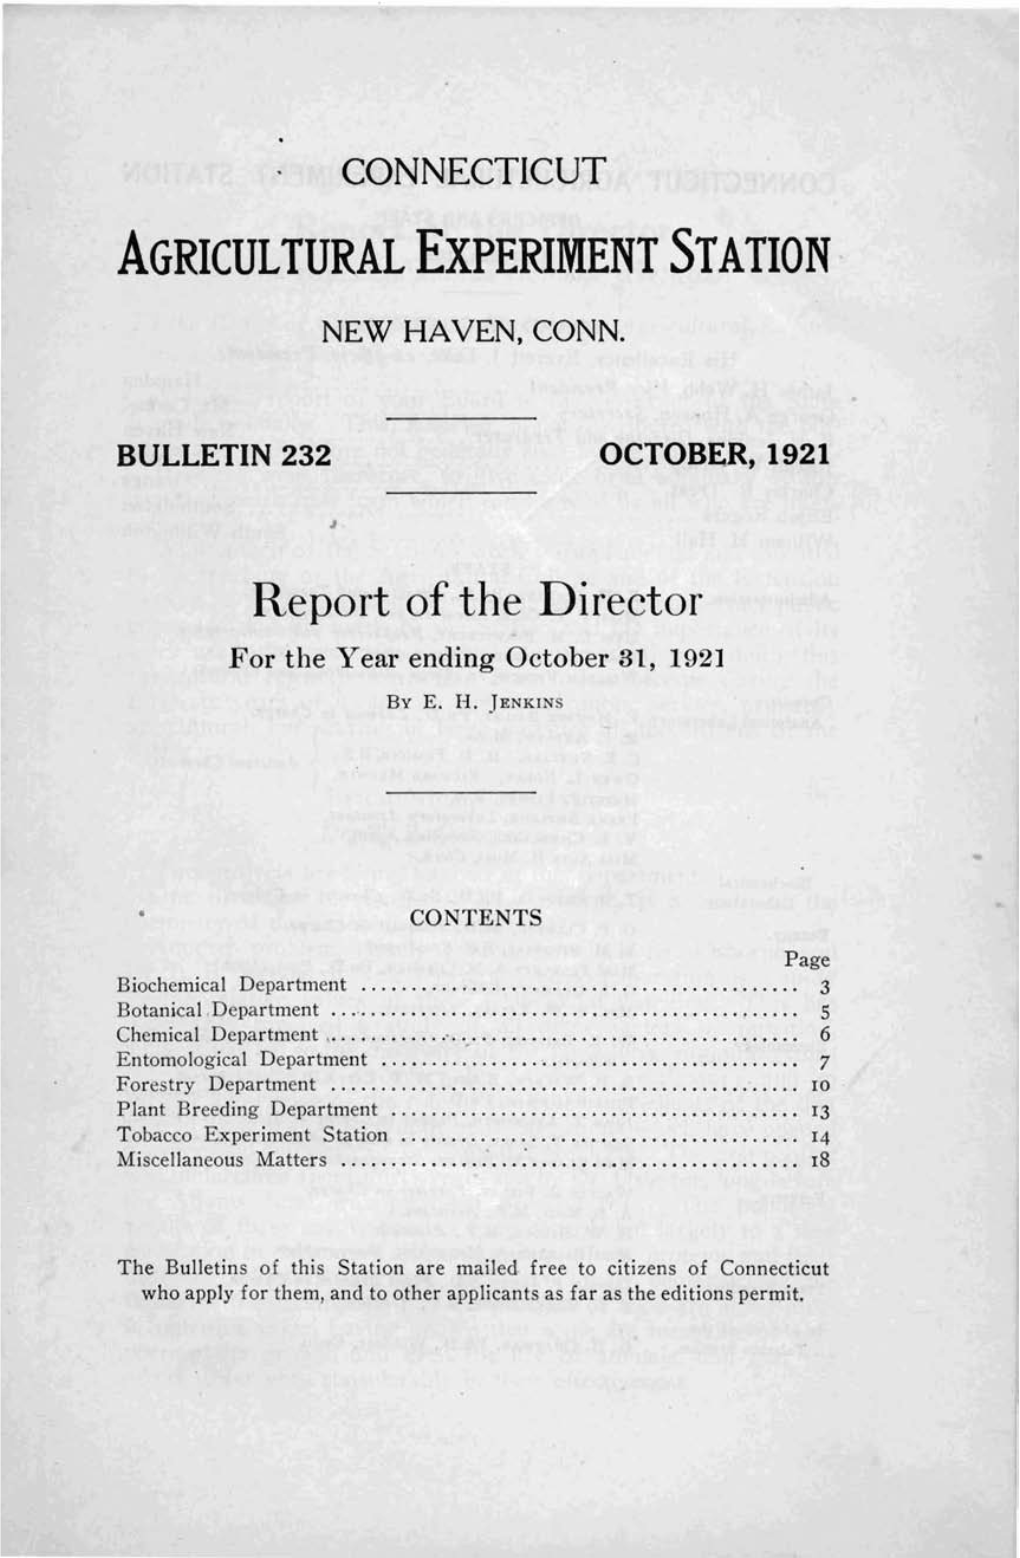 Report of the Director for the Year Ending October 31, 1921